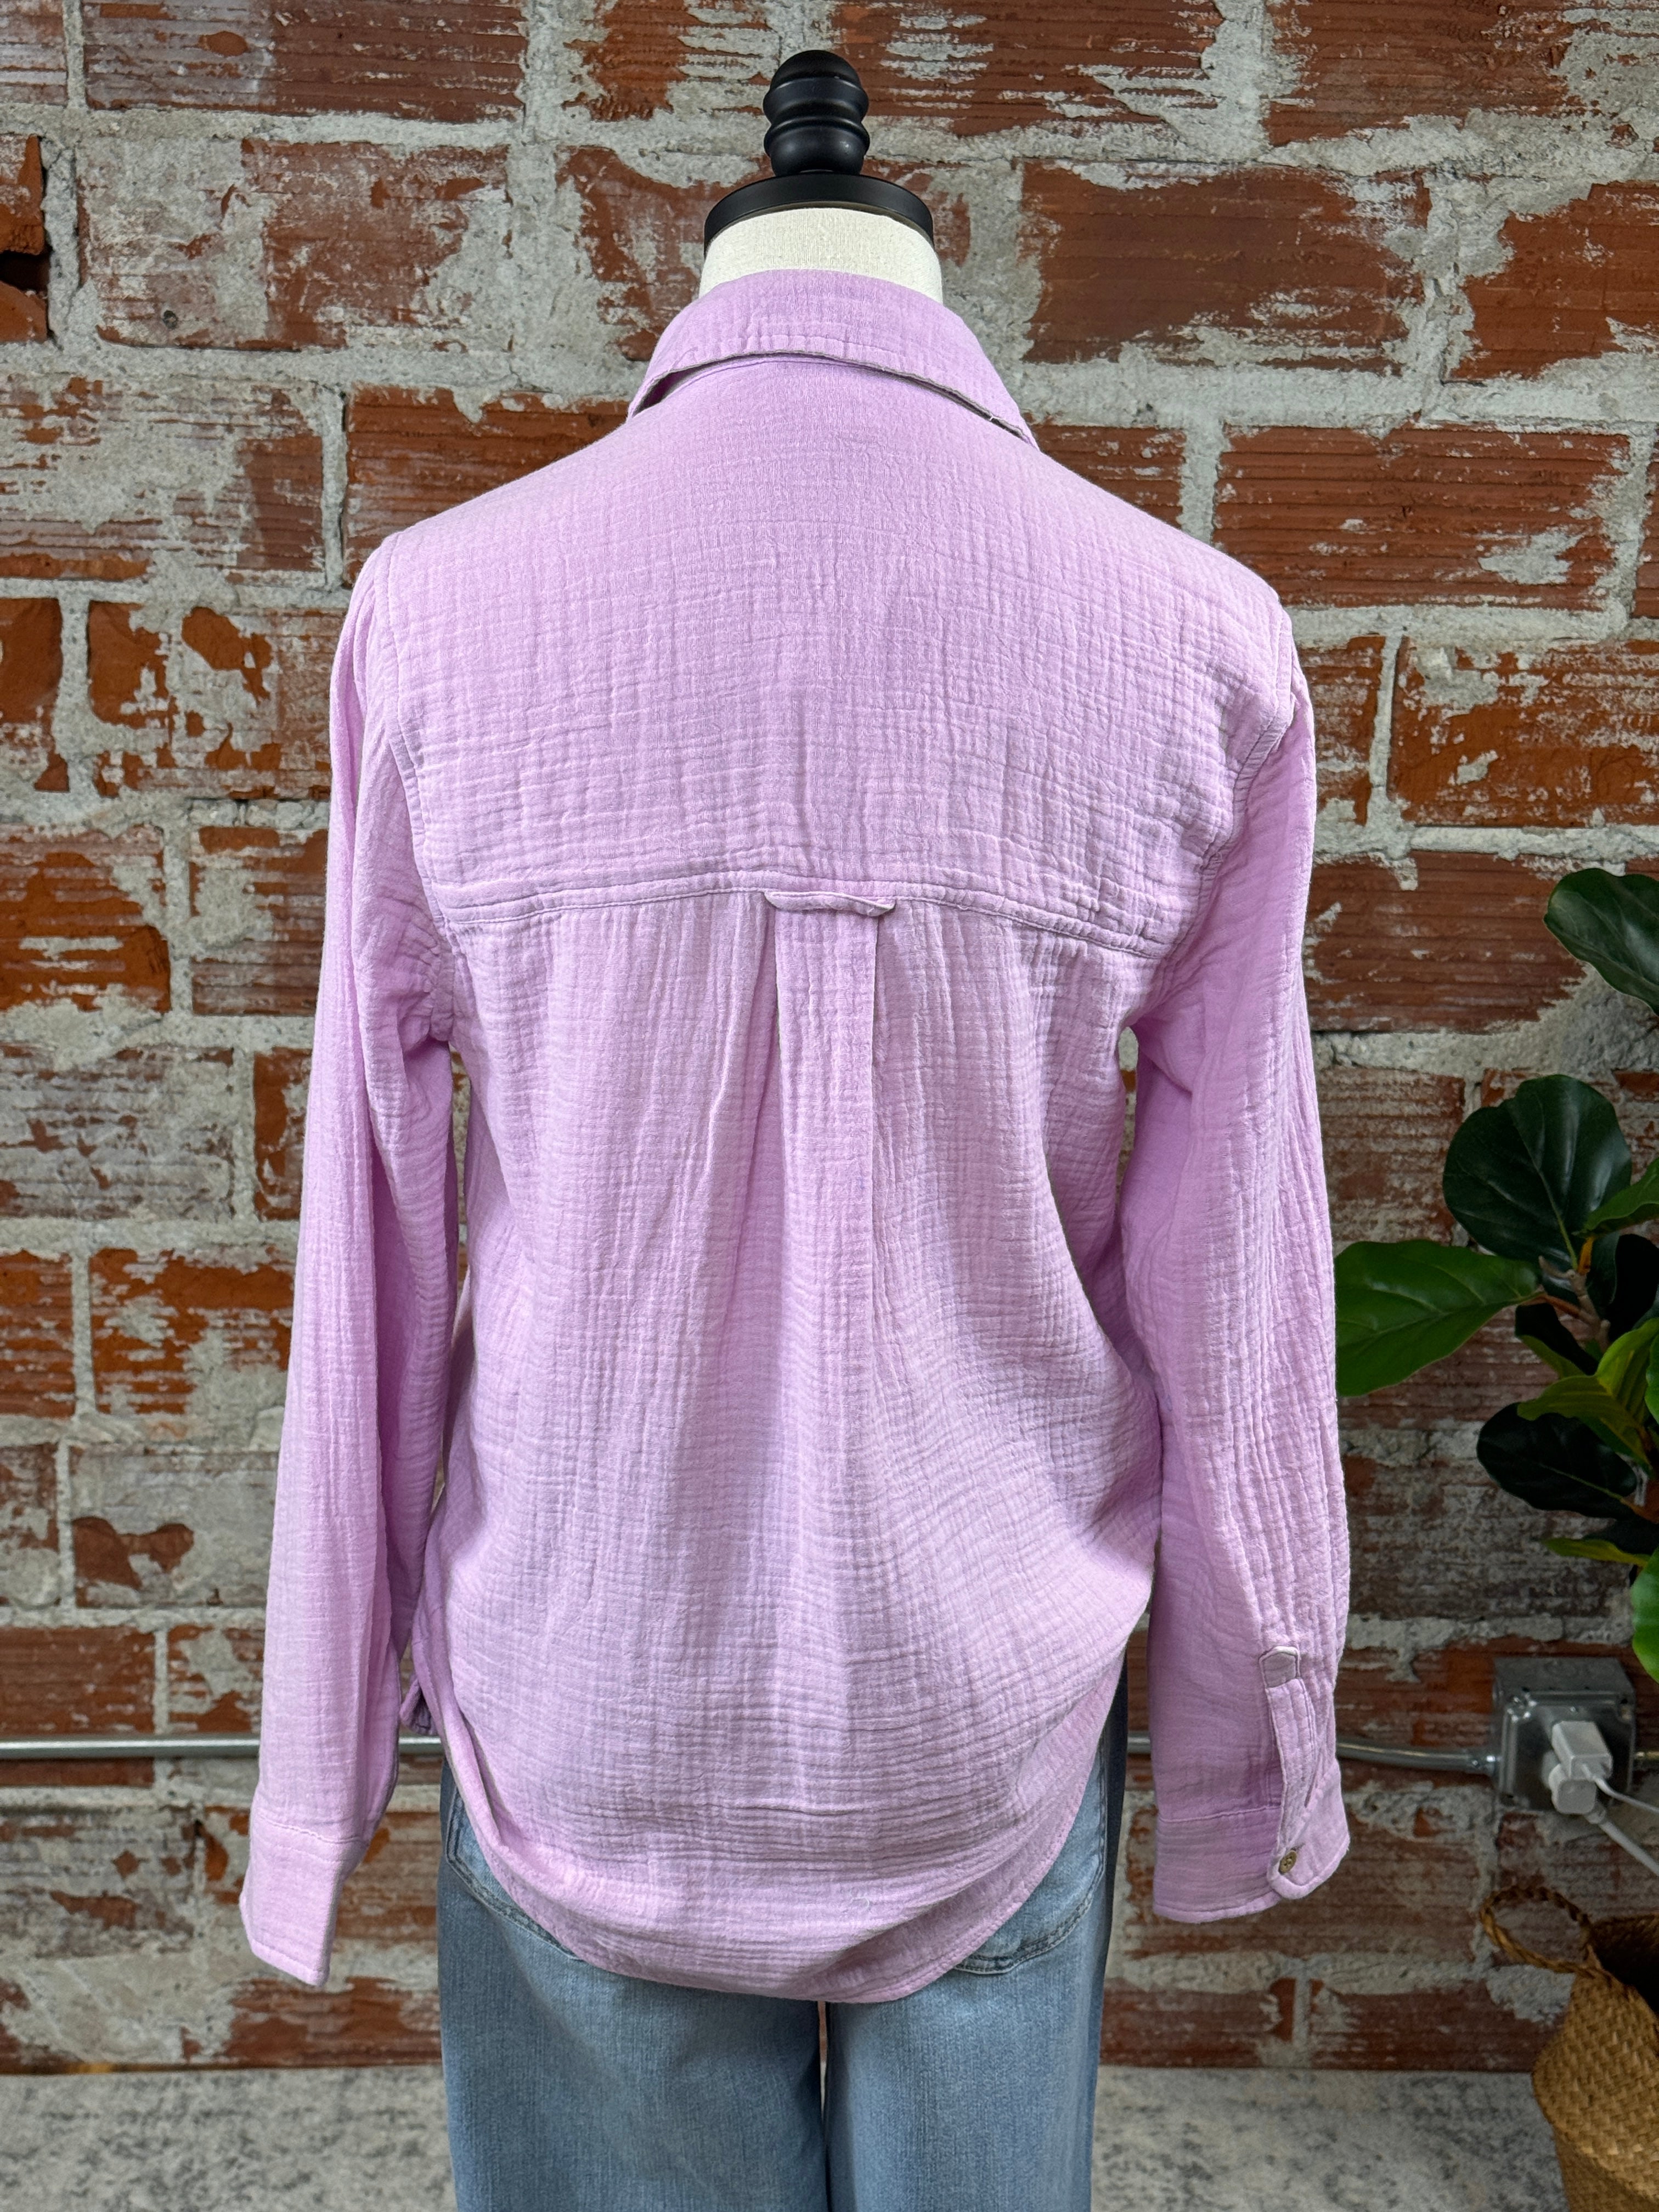 Alessia Top in Lilac-112 Woven Tops - Long Sleeve-Little Bird Boutique